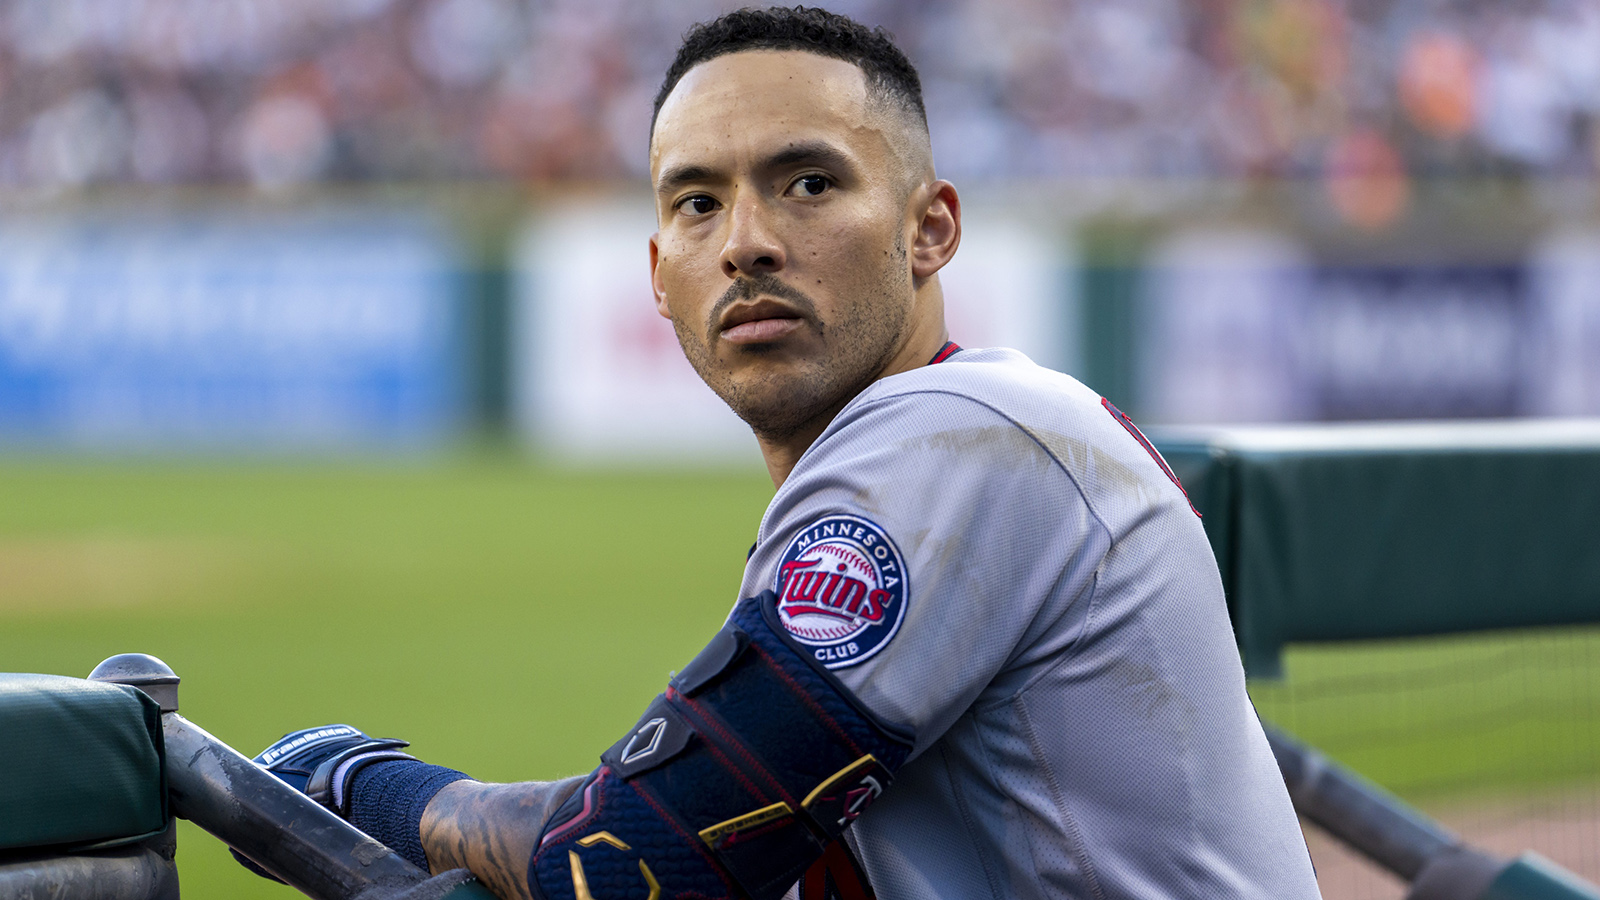 Amid Carlos Correa Physical Report, Mets Still Favorites to Win World Series